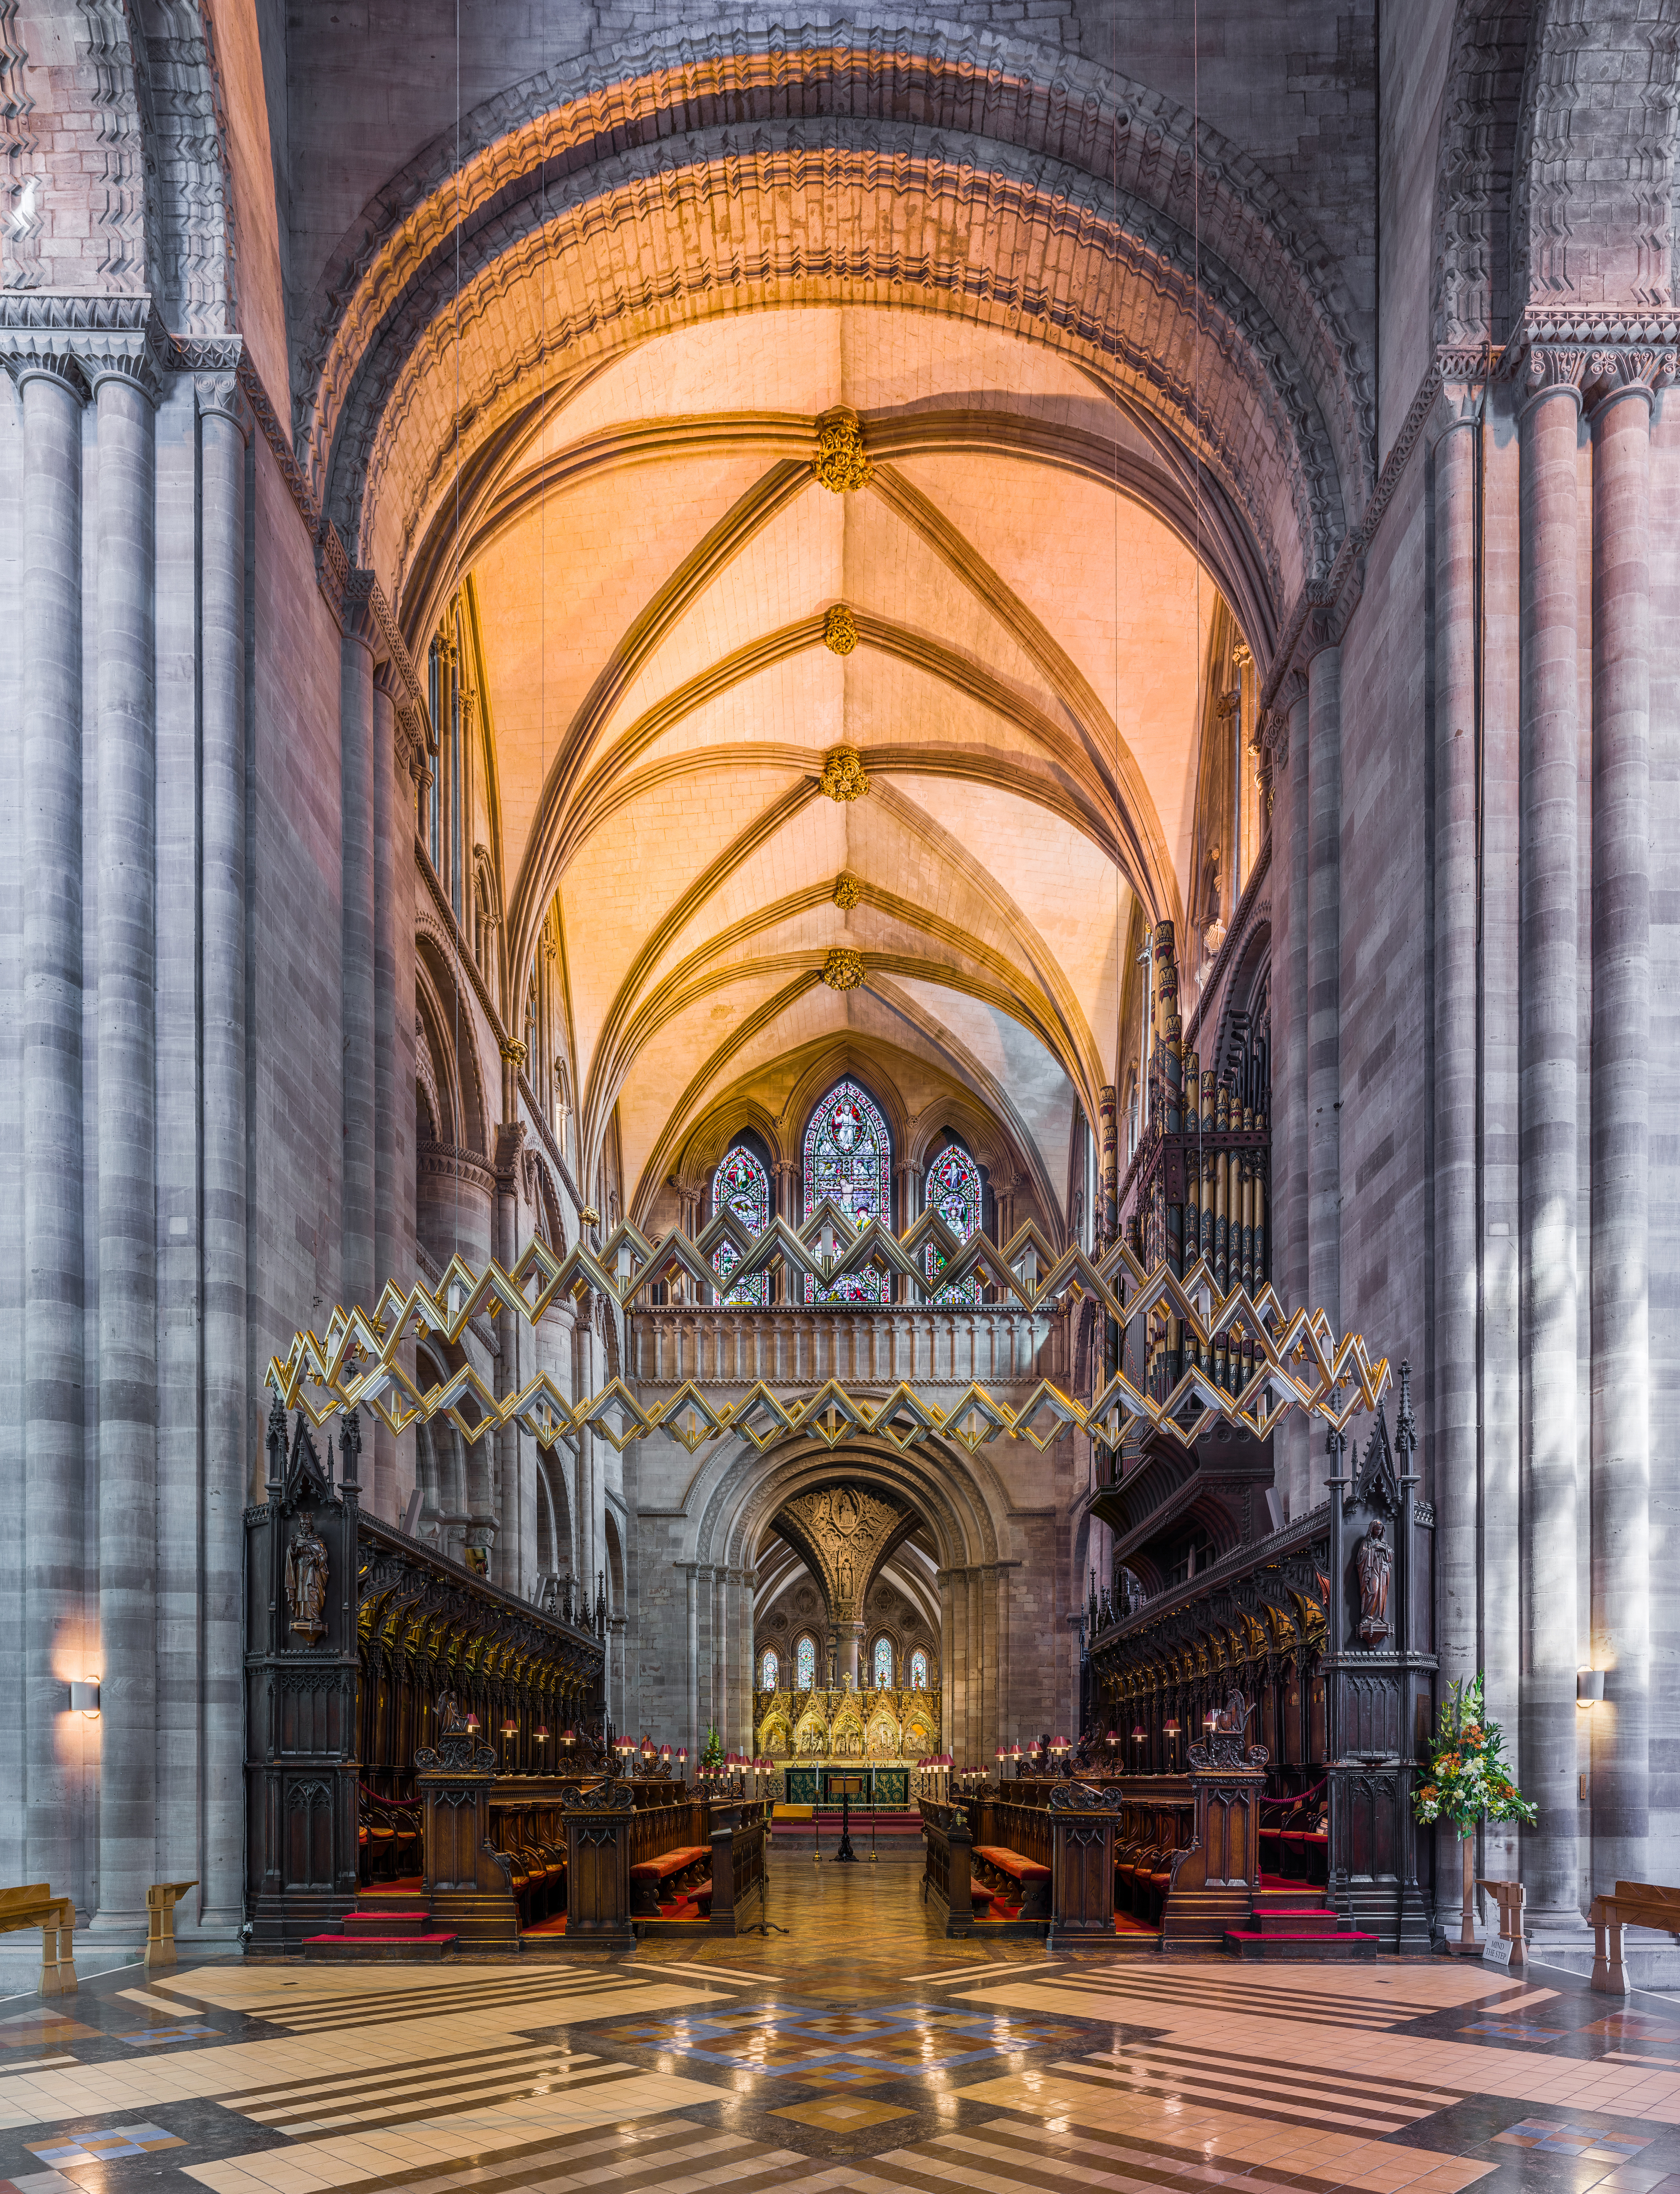 Hereford Cathedral - Wikipedia